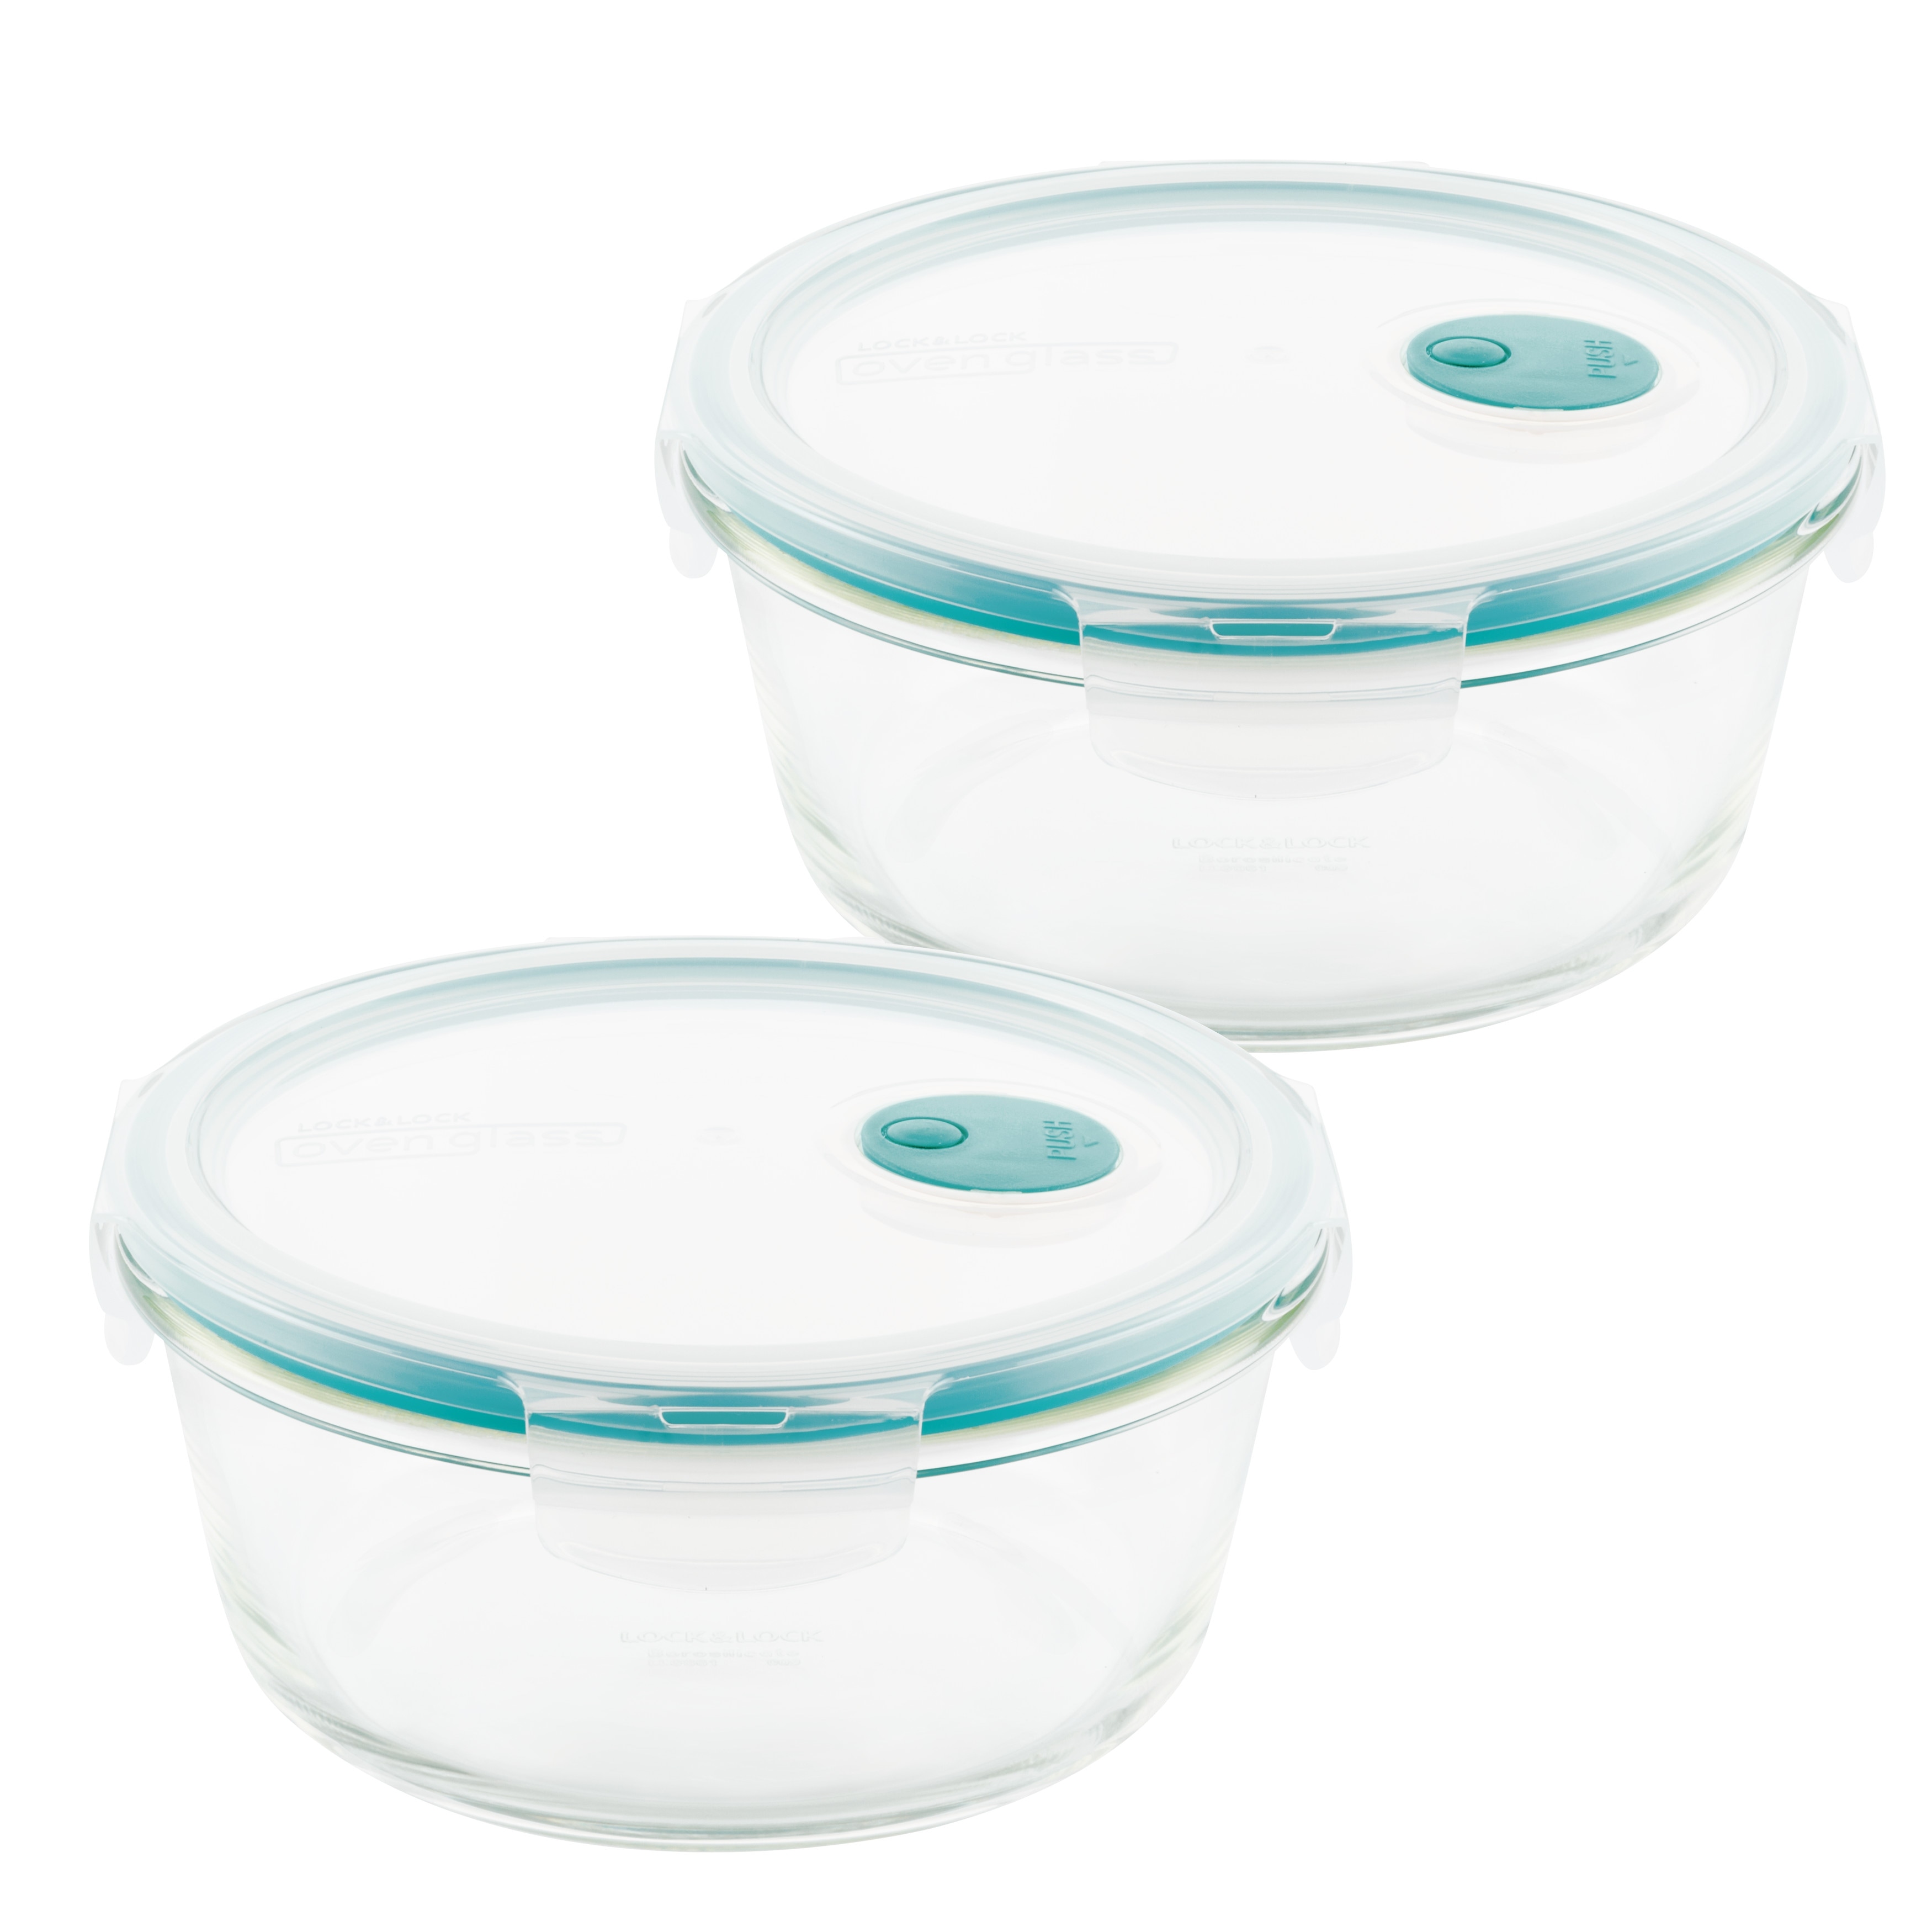 https://ak1.ostkcdn.com/images/products/is/images/direct/adfe1b722f668a2a8ab4157dc00fc2a13642871e/LocknLock-Purely-Better-Vented-Glass-Round-Food-Storage-Containers%2C-32-Ounce%2C-Set-of-Two.jpg